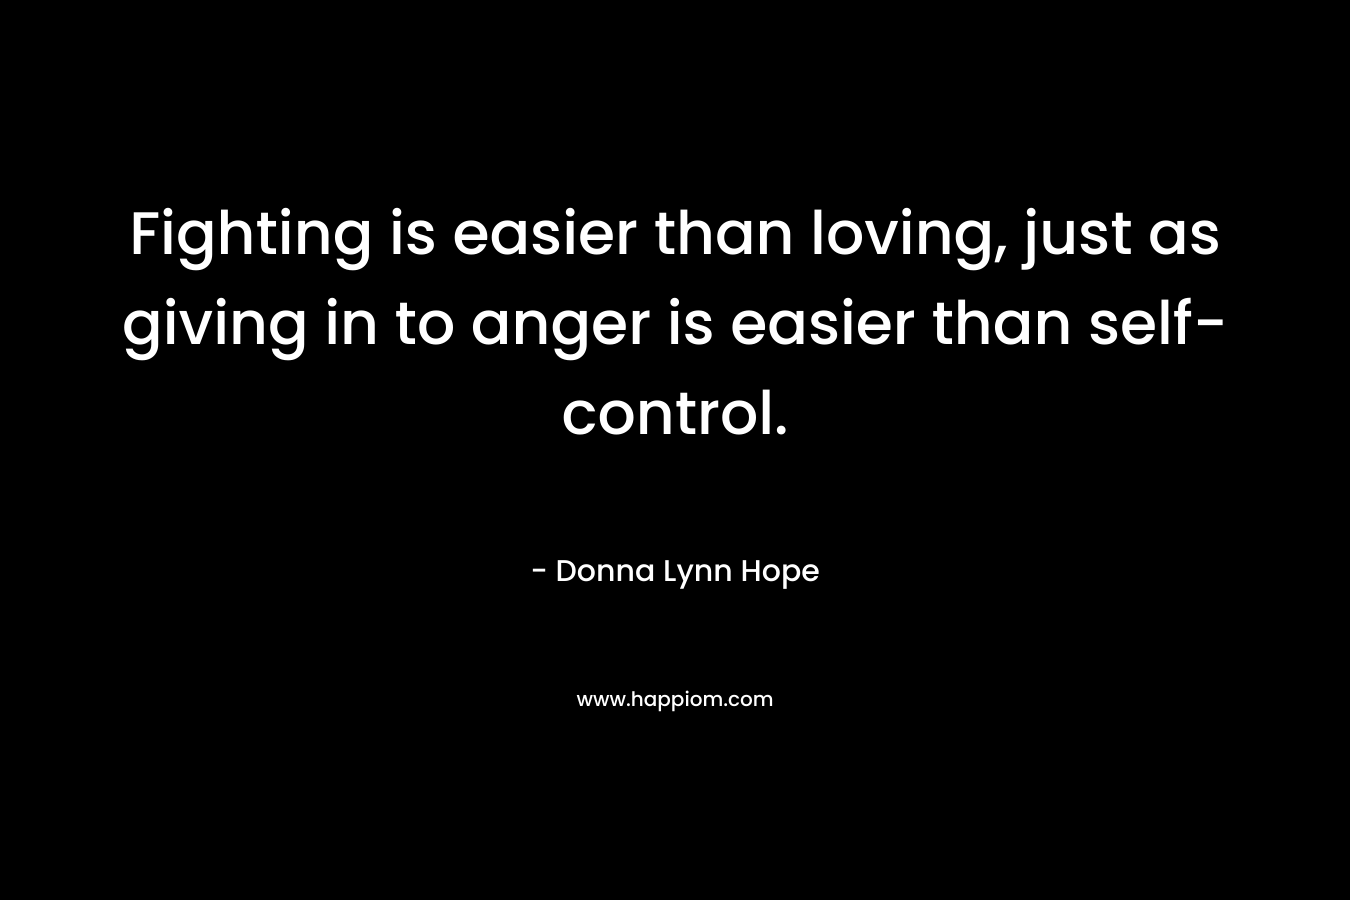 Fighting is easier than loving, just as giving in to anger is easier than self-control.